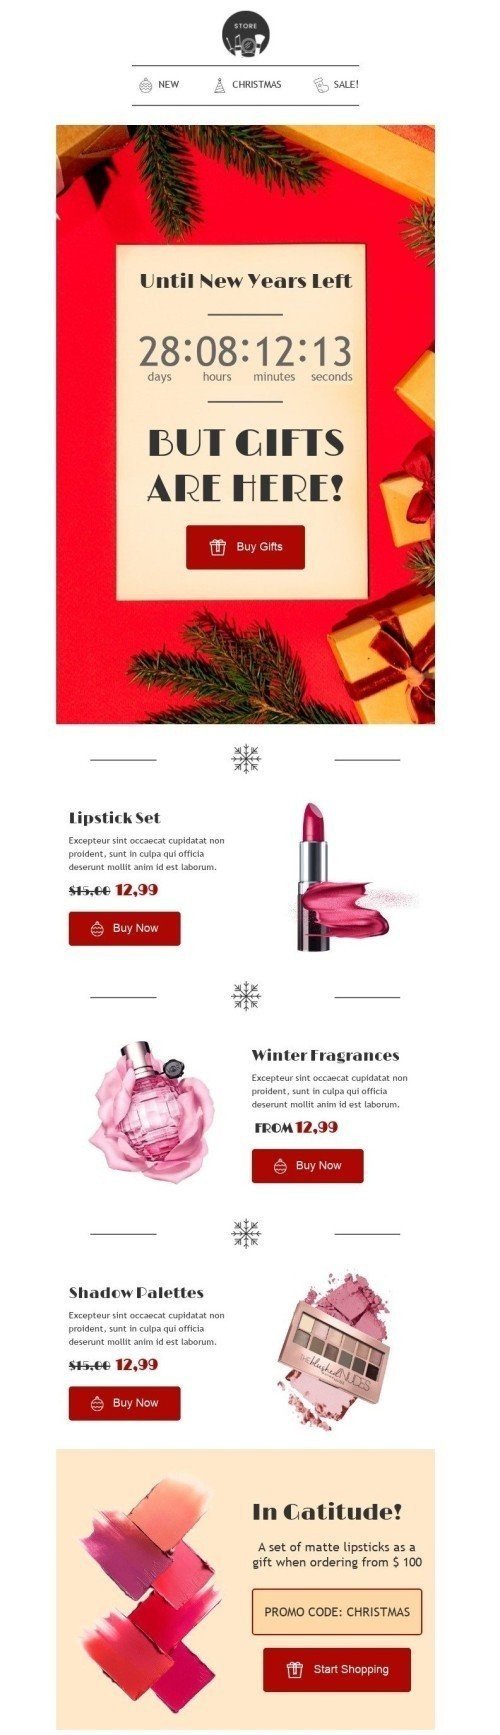 Christmas Email Template "Gifts are here" for Beauty & Personal Care industry desktop view